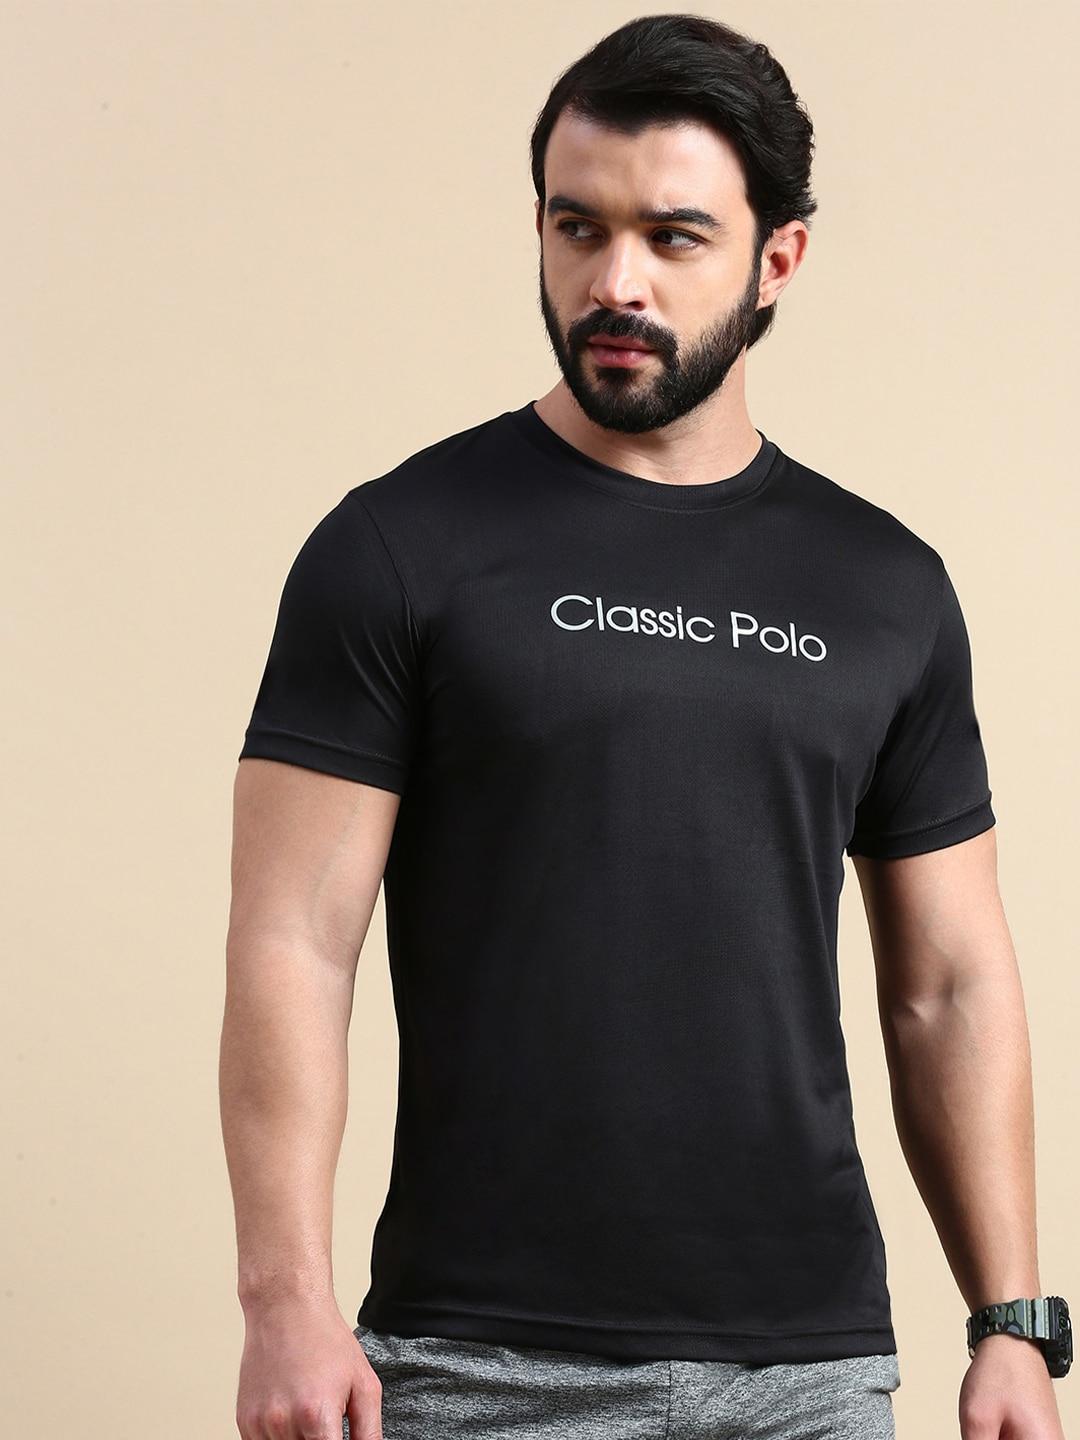 classic polo typography printed round neck raglan sleeves antimicrobial slim fit t-shirt